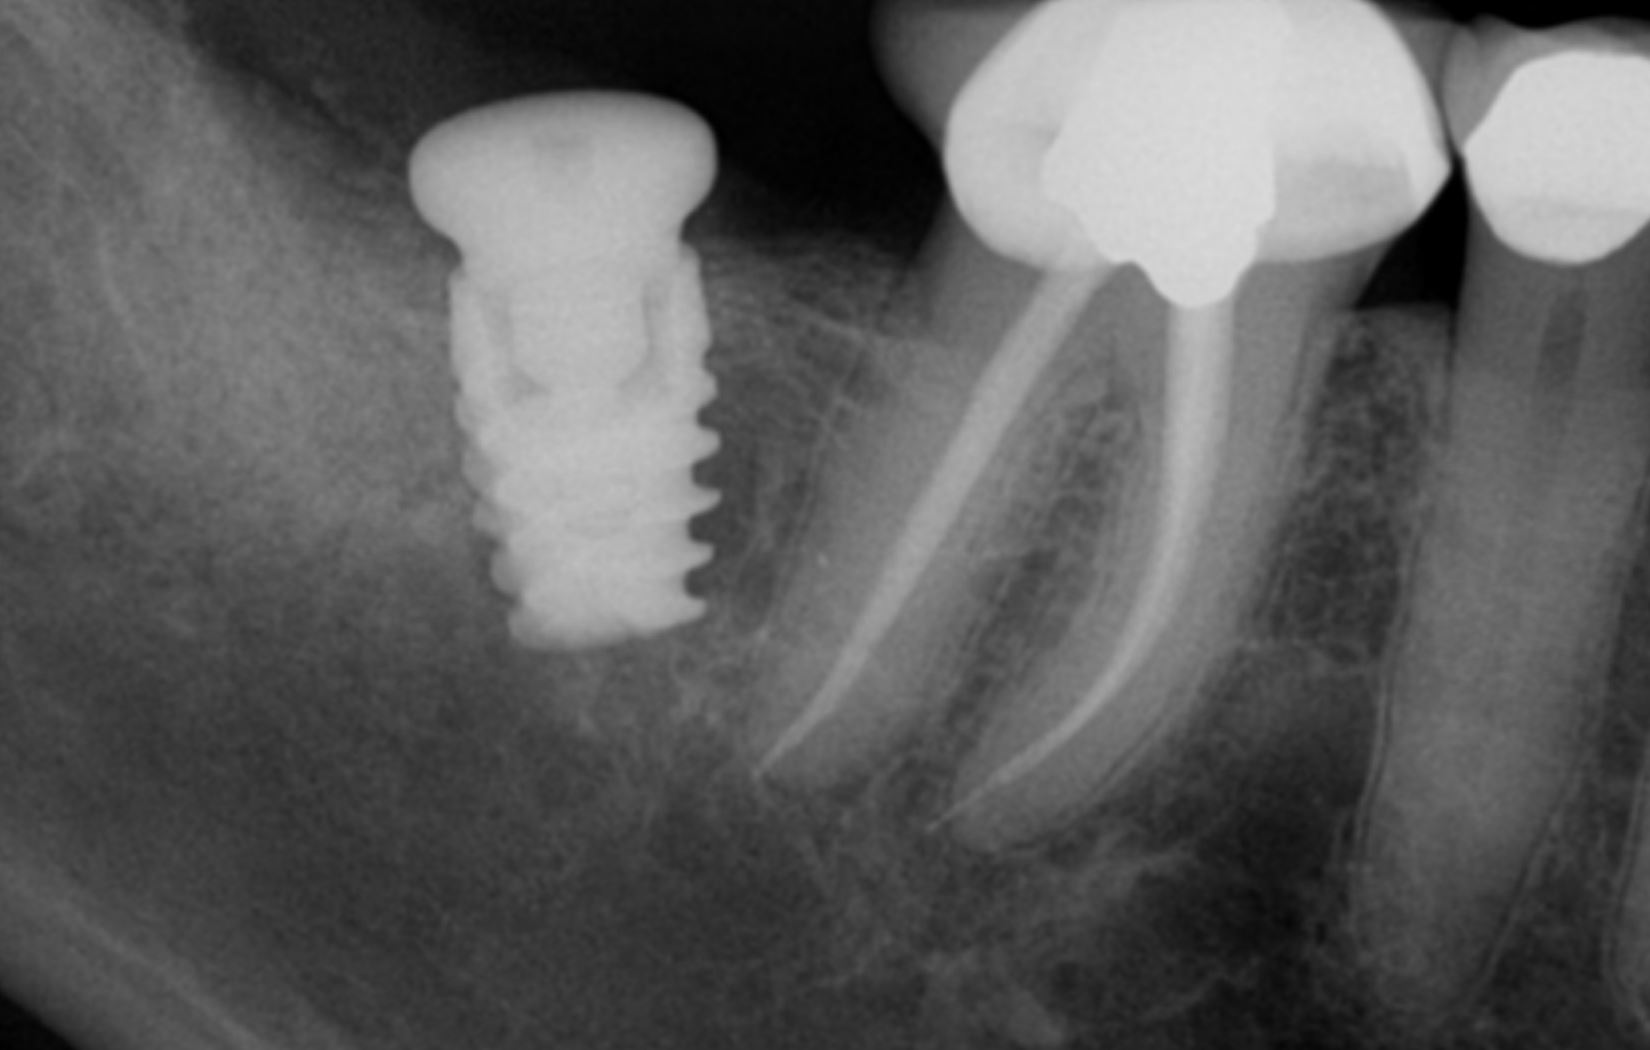 Misangulated implant? What would you have done?